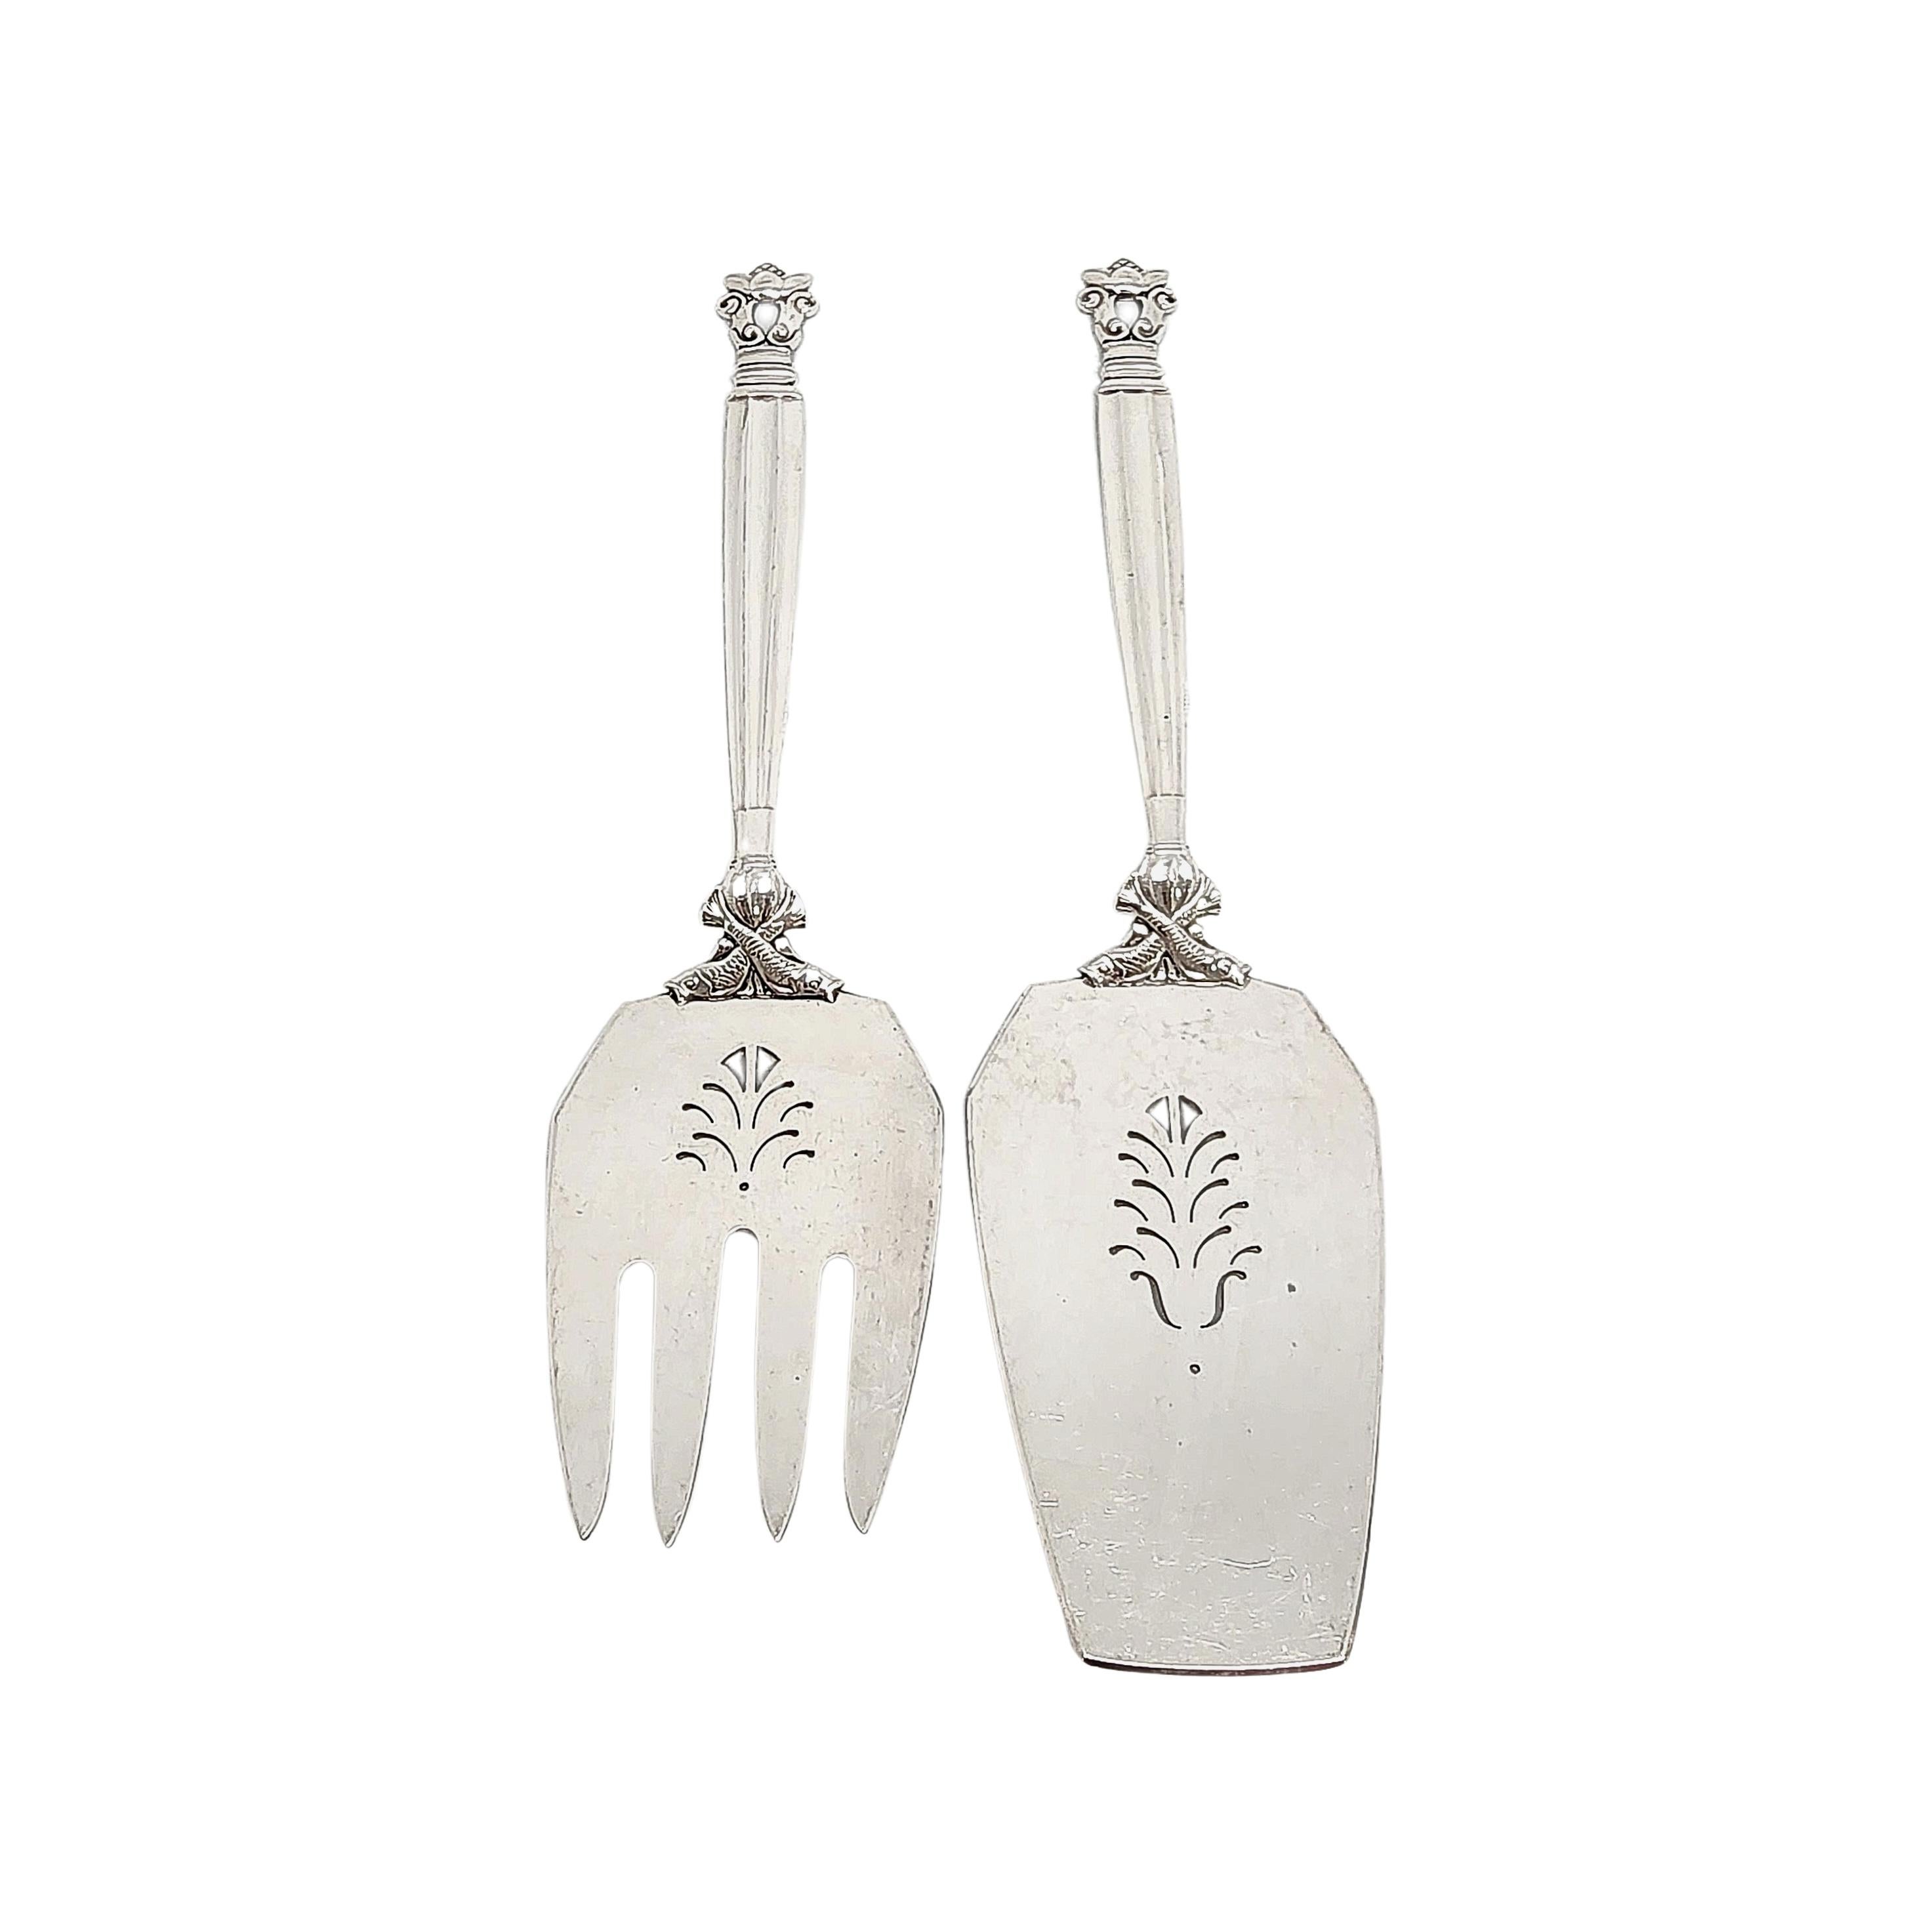 Sterling silver 2pc fish serving set in the Acorn pattern by Georg Jensen.

The Acorn pattern was introduced in 1915 as a collaboration between Georg Jensen and designer Johan Ronde. The Acorn pattern, which combines Art Nouveau and Art Deco styles,